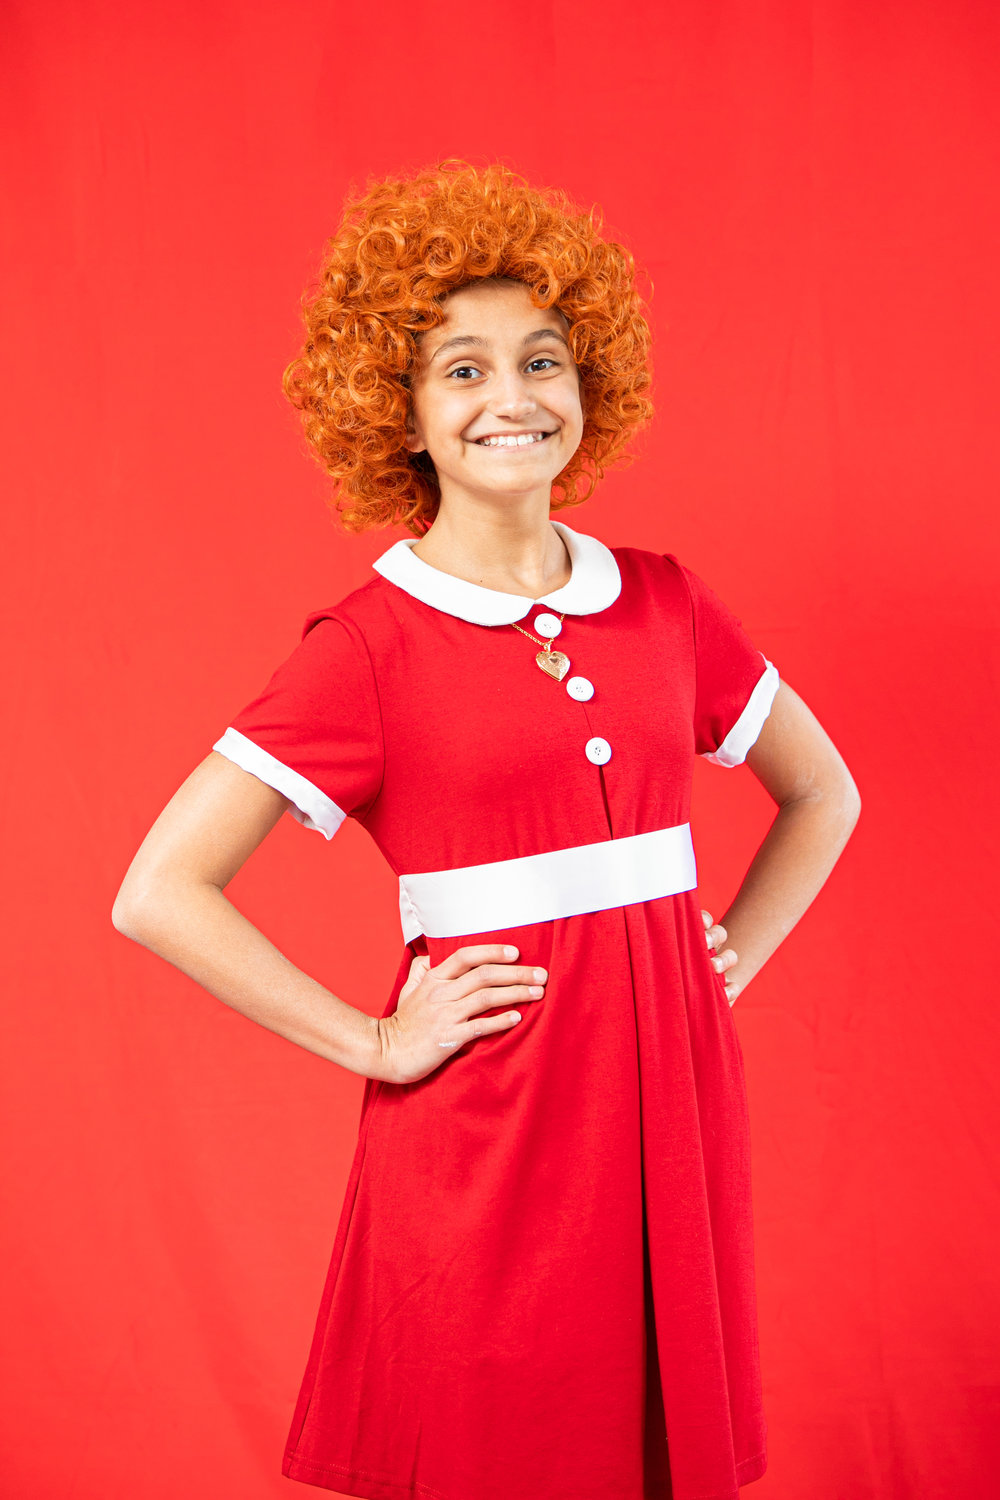 Addison Bartels portrays Annie in the CTA production.